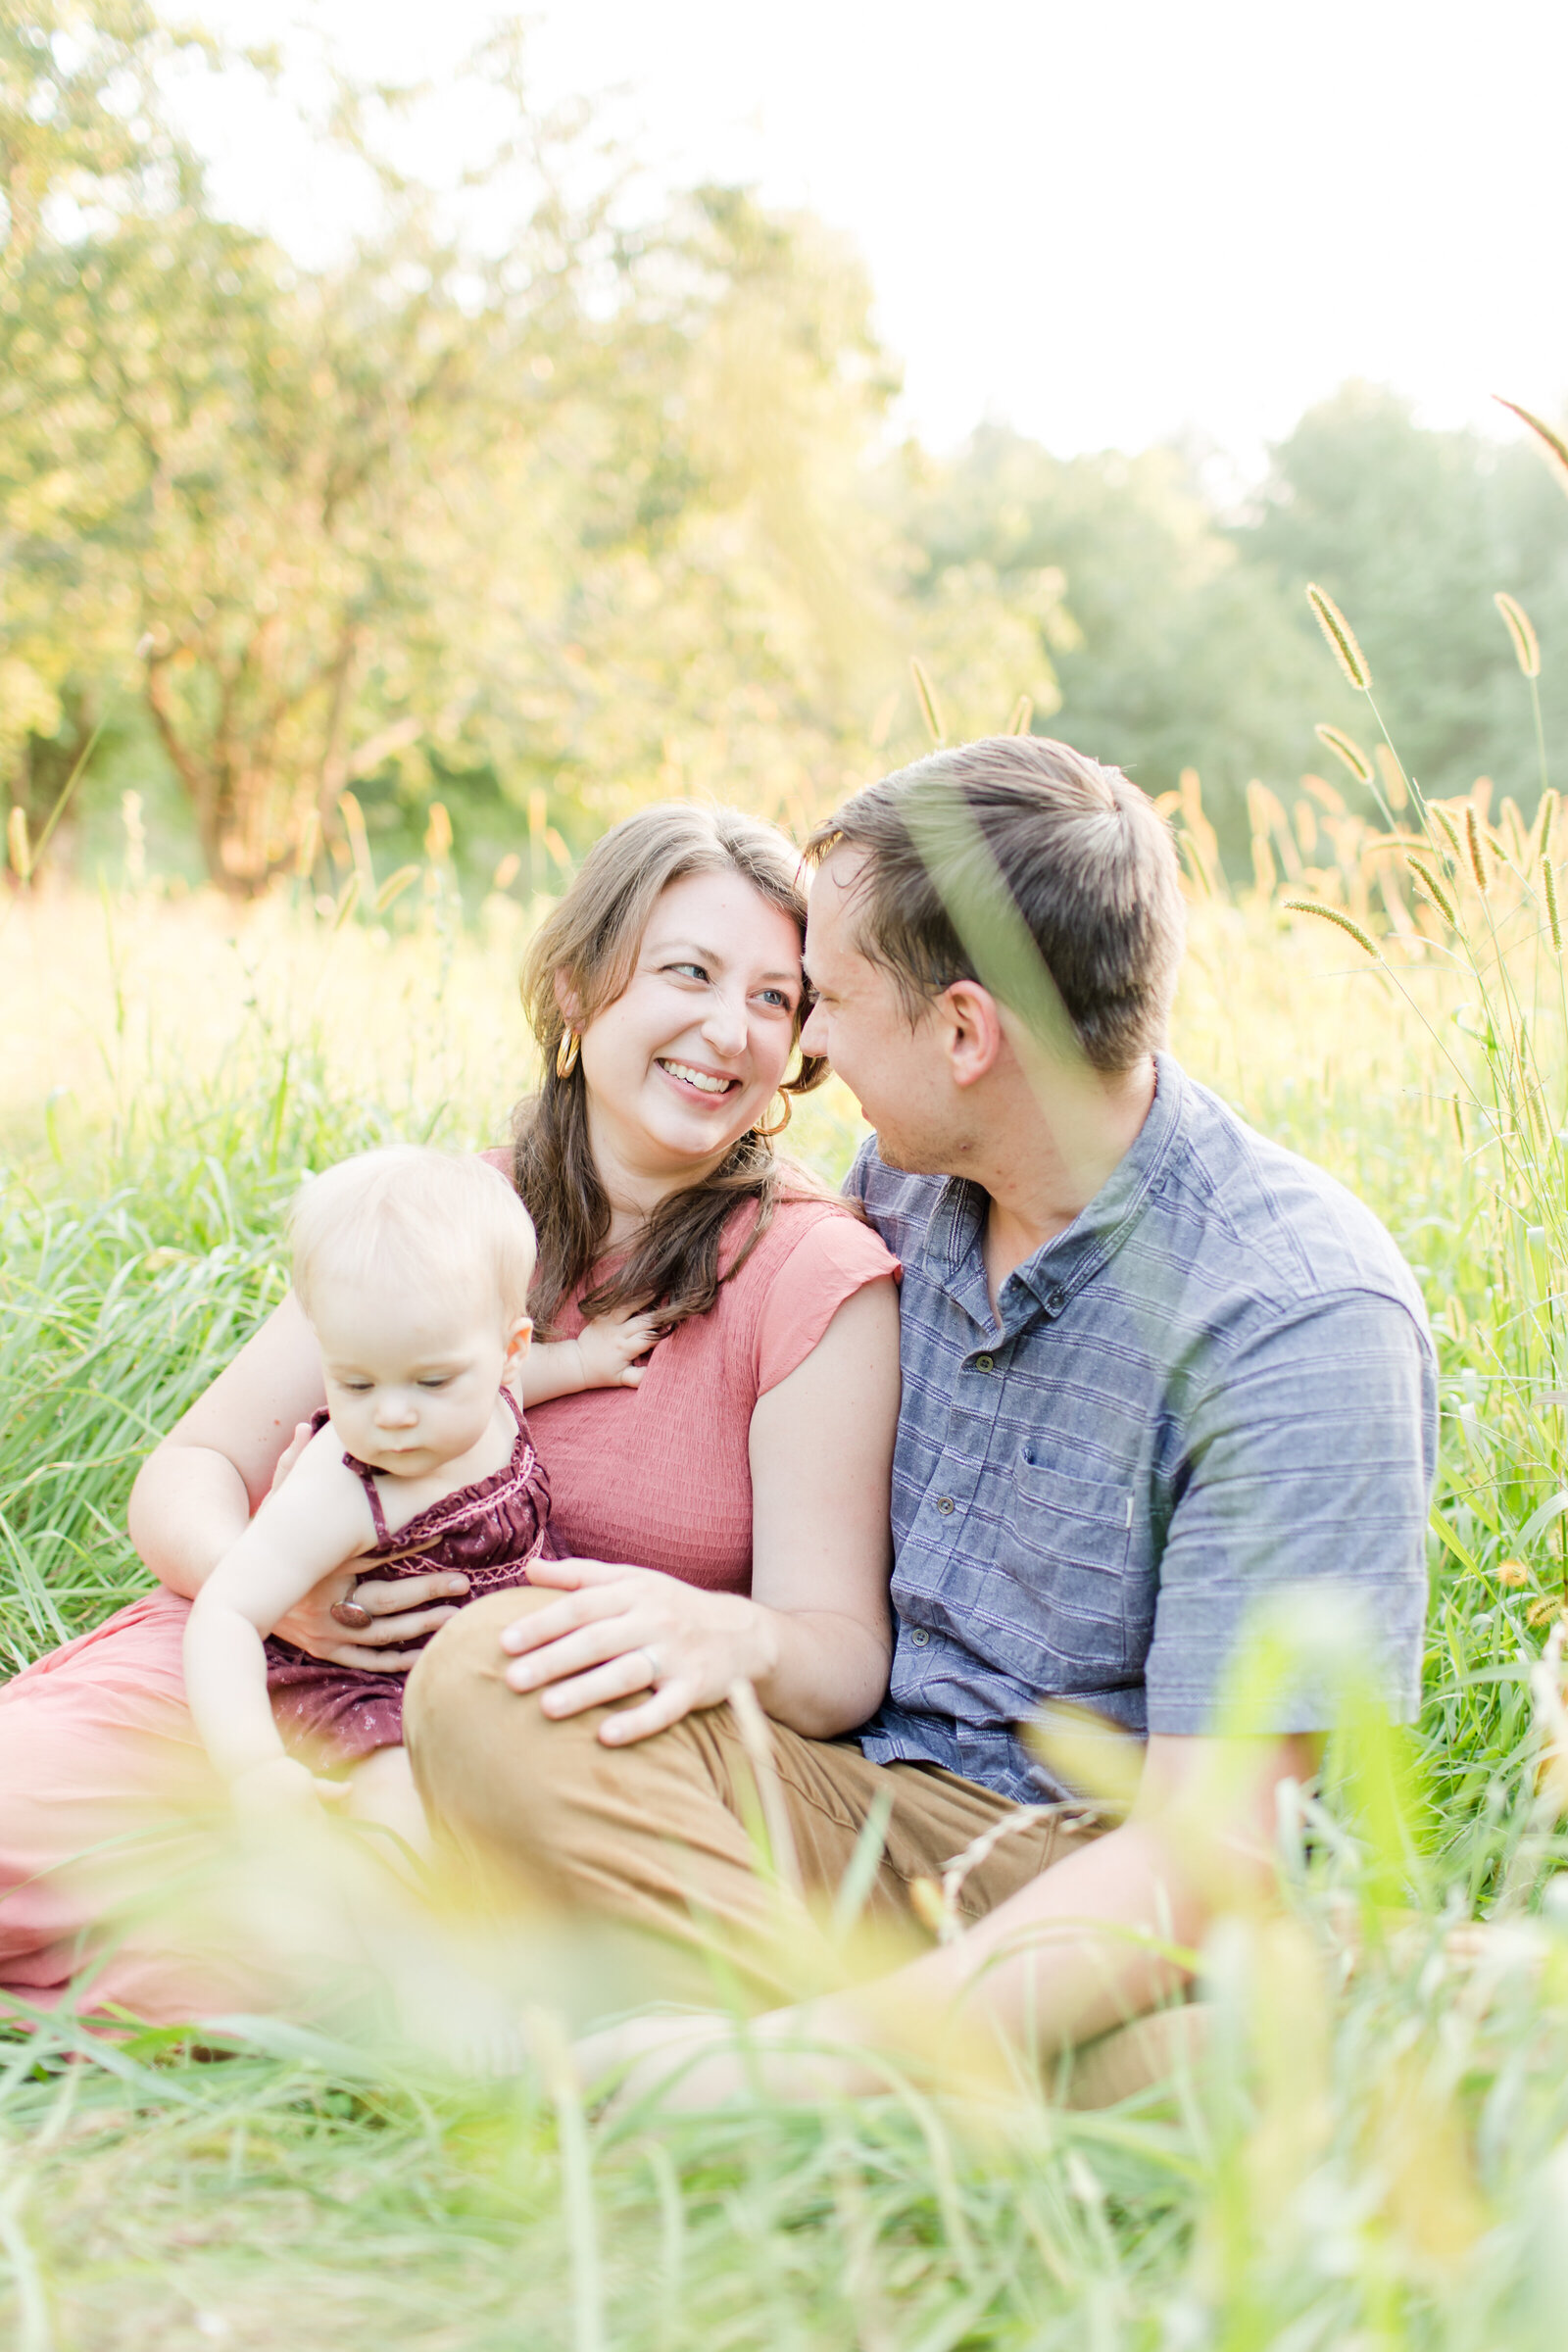 Bright and colorful family photographer based in Metrowest Boston